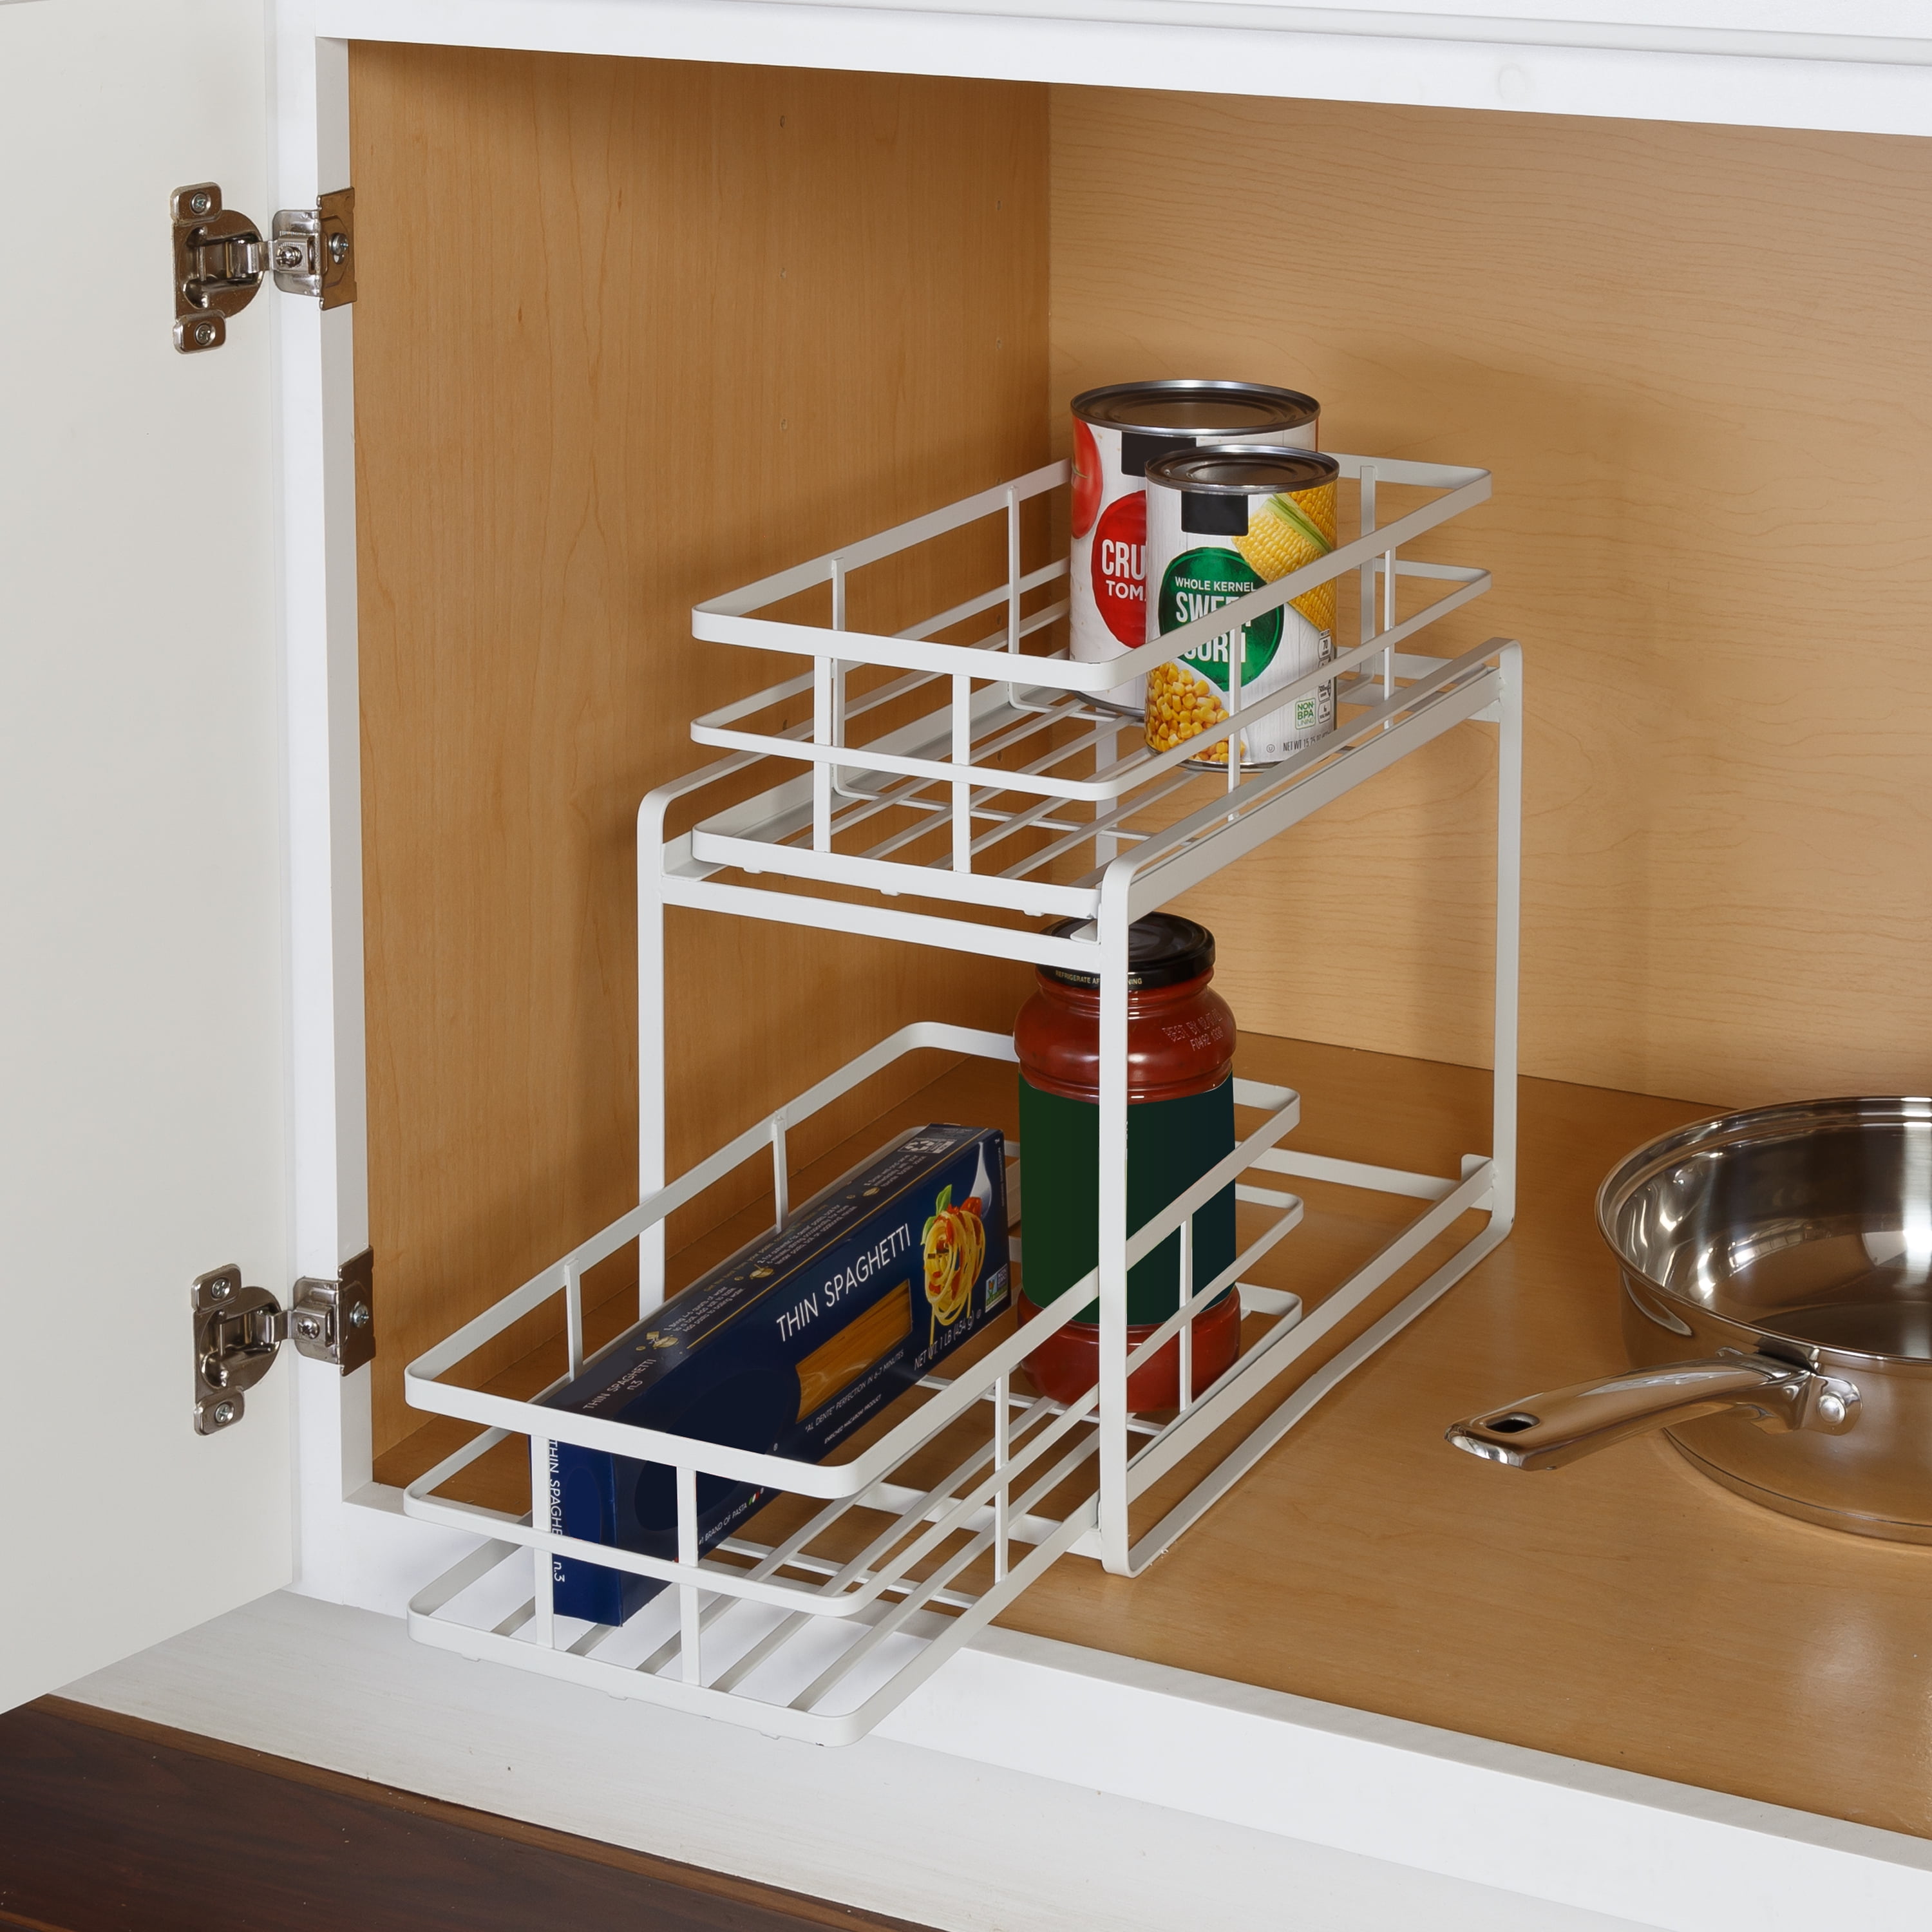 OCG Pull Out Drawers for Cabinets 14 W x 21 D, Cabinet Drawers Slide Out,  Pull Out Cabinet Organizer for Base Cabinet Organization in Kitchen